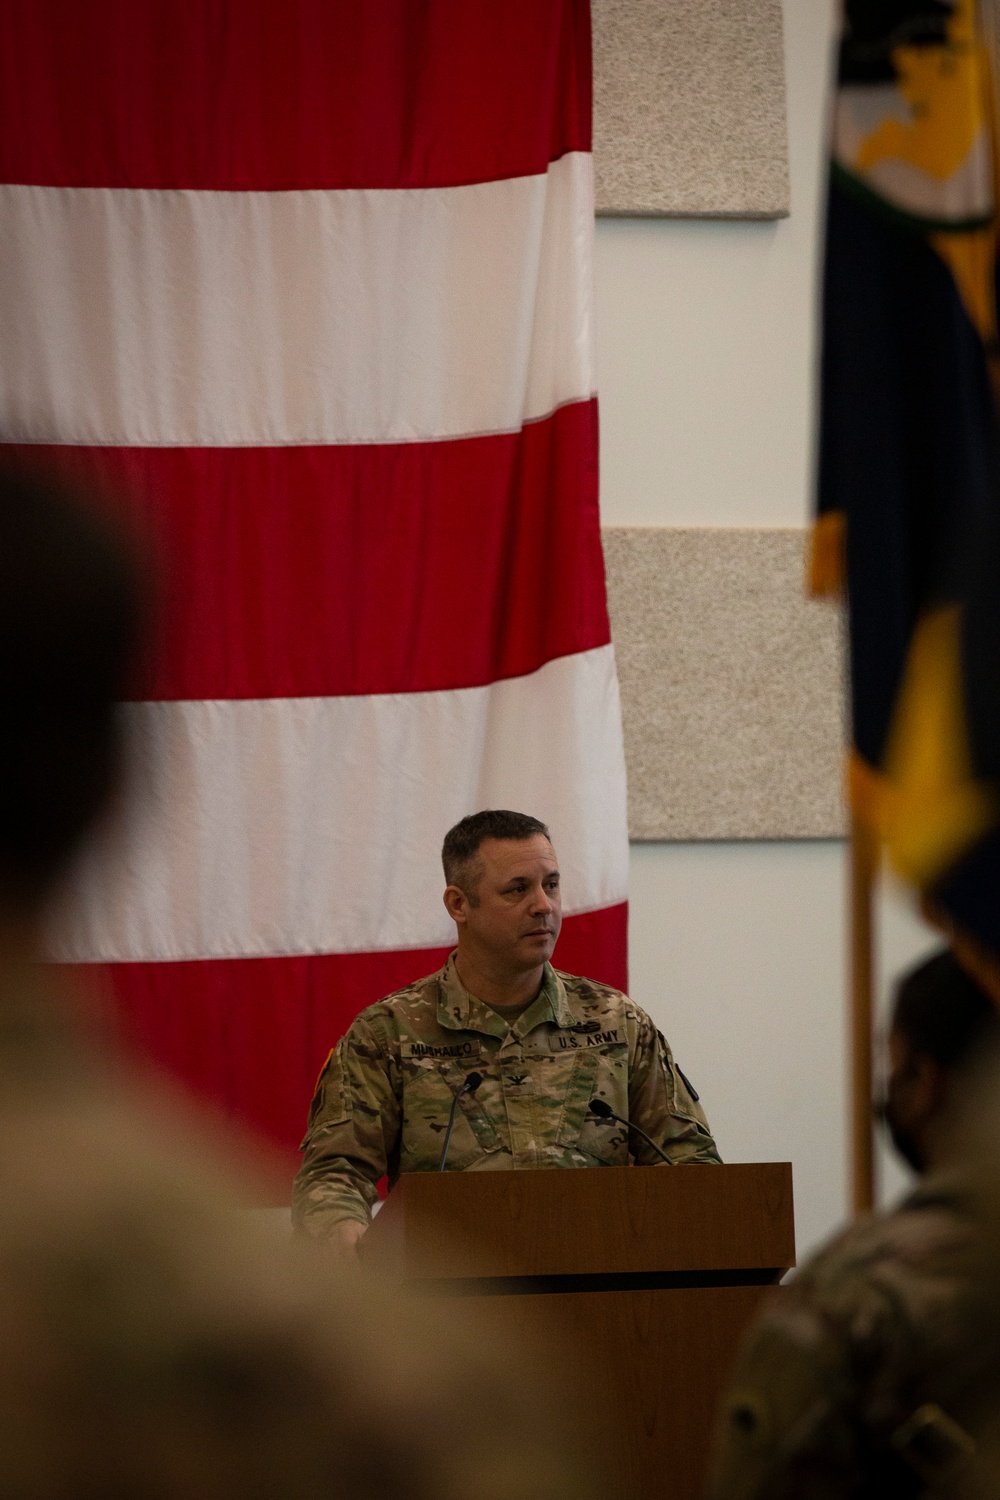 96th Troop Command change of command